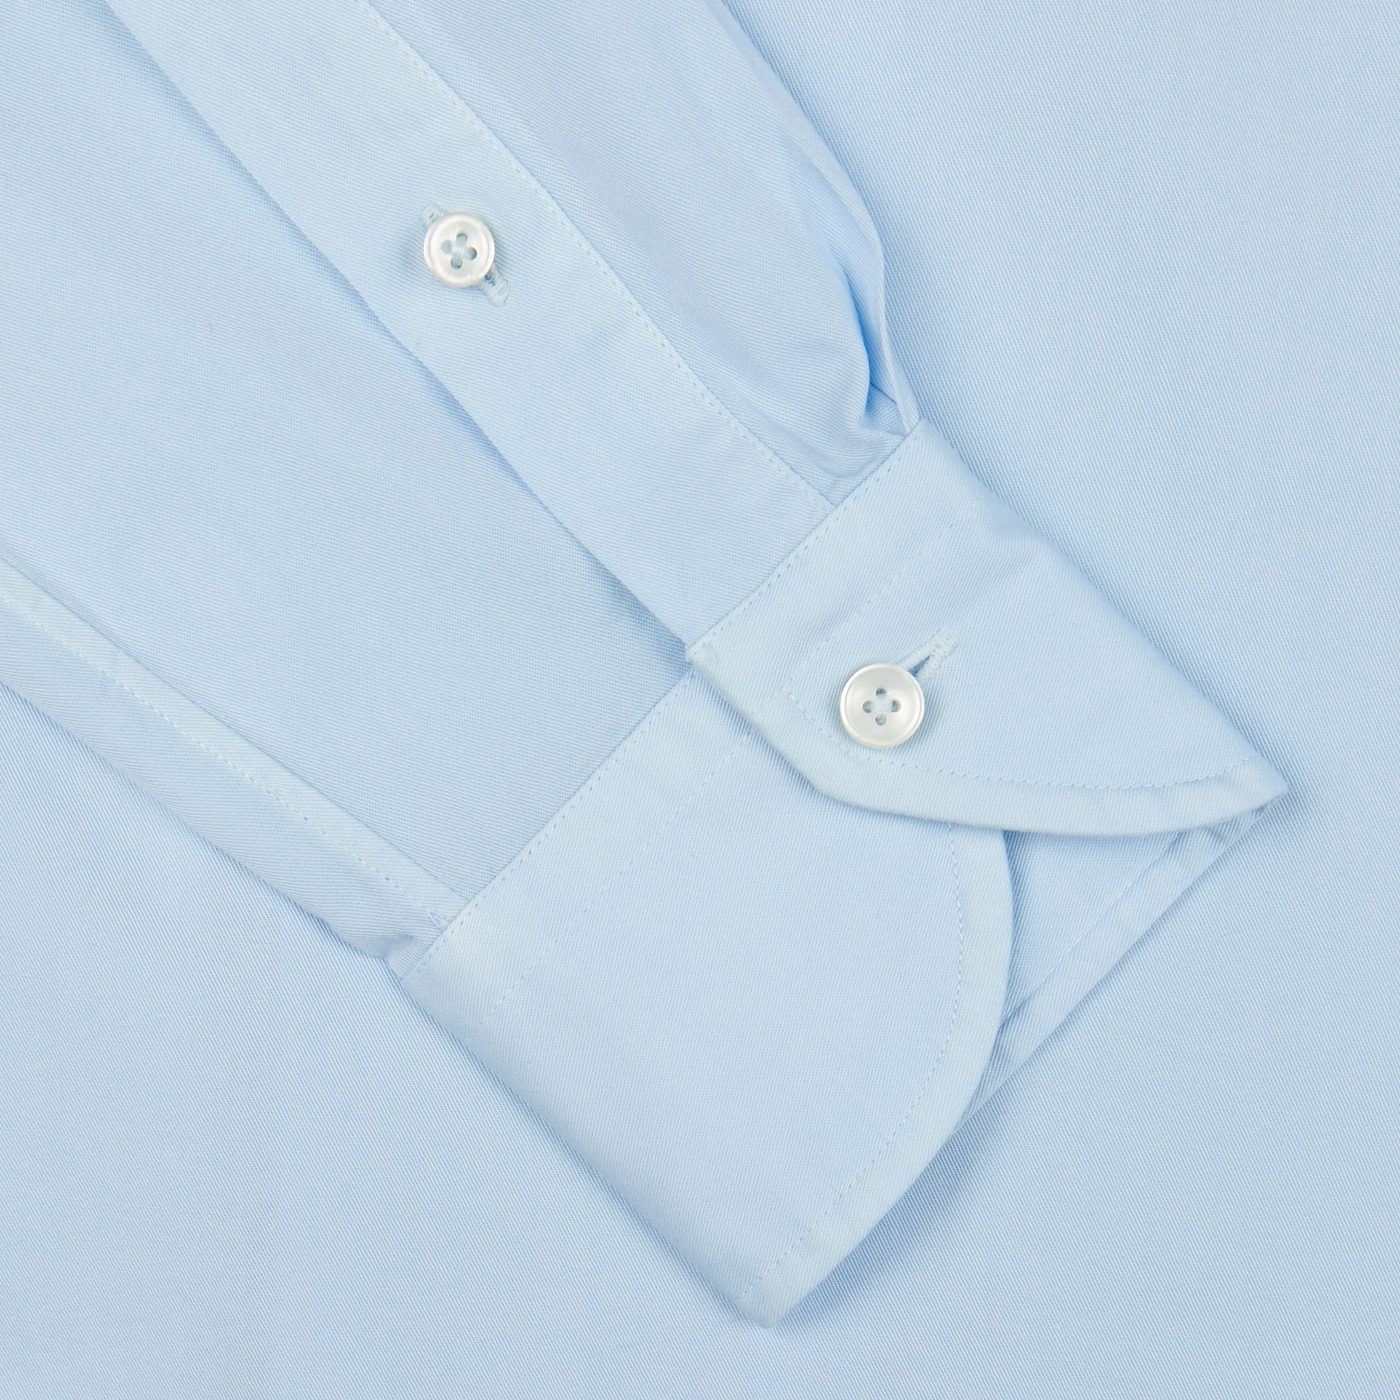 Xacus Light Blue Twill Tailor Fit Shirt with buttoned cuffs on a light blue background.